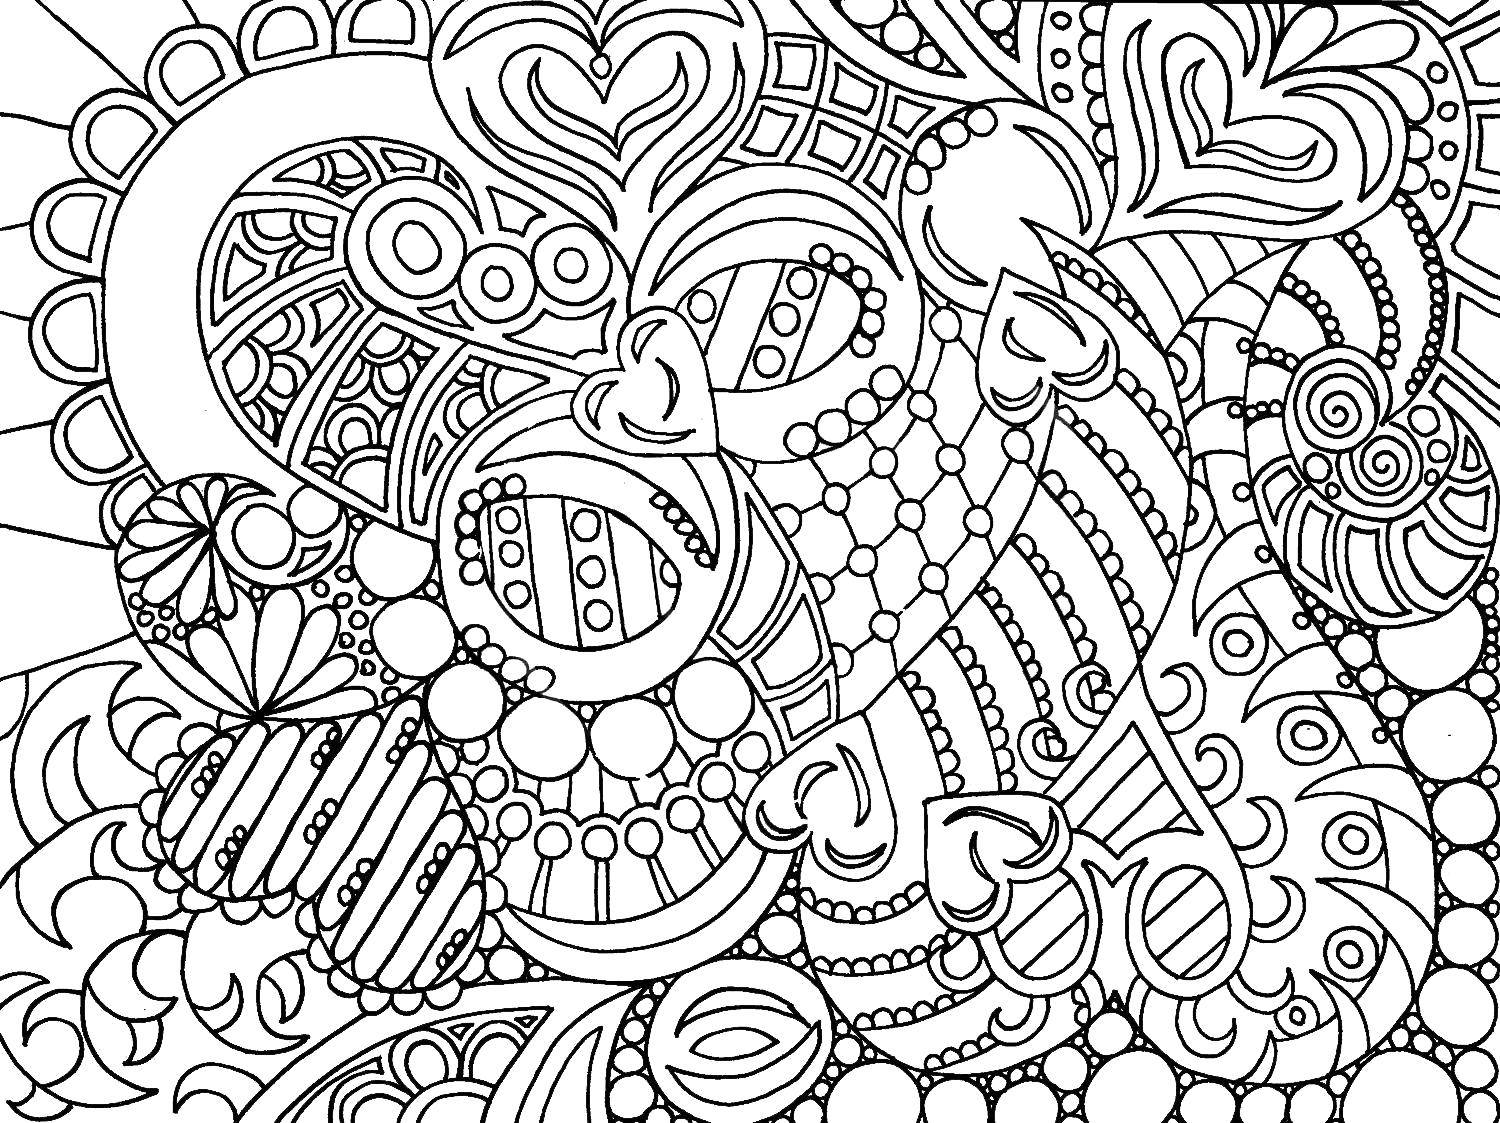 Coloring Beautiful patterns. Category patterns. Tags:  Patterns, hearts.